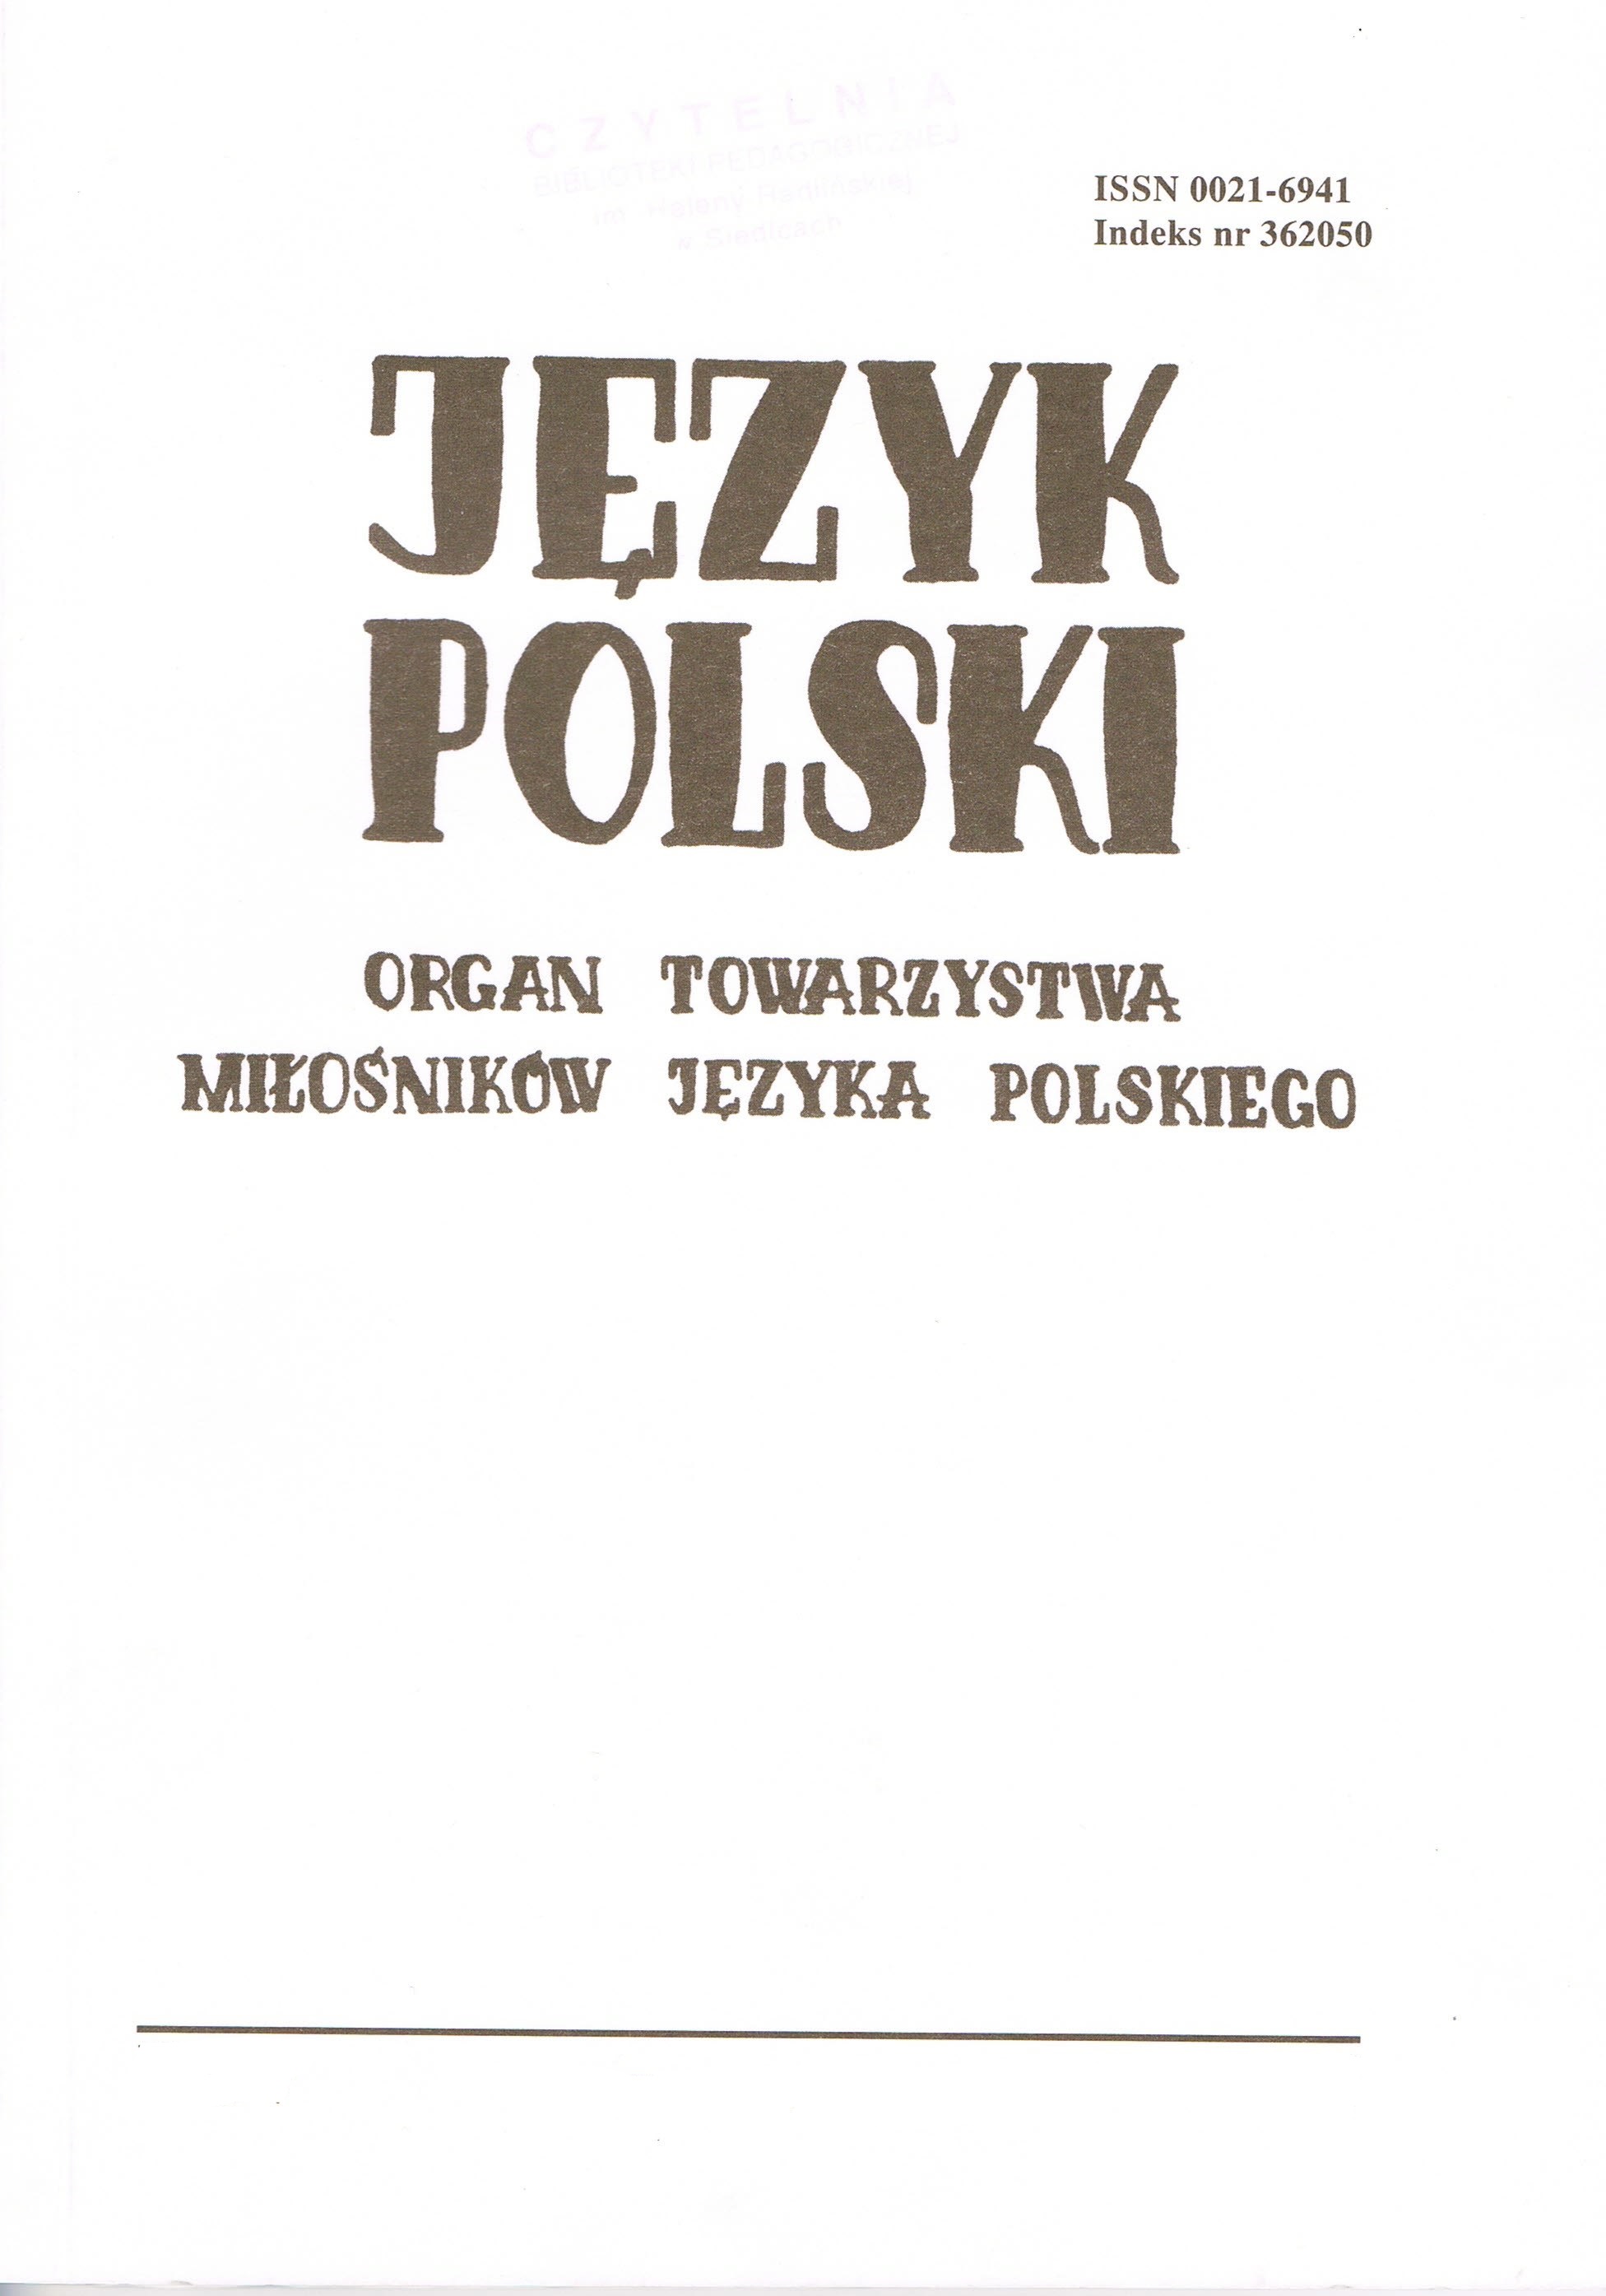 Nie masz, kto ratując: on uninflected present participles in Old Polish subject clauses Cover Image